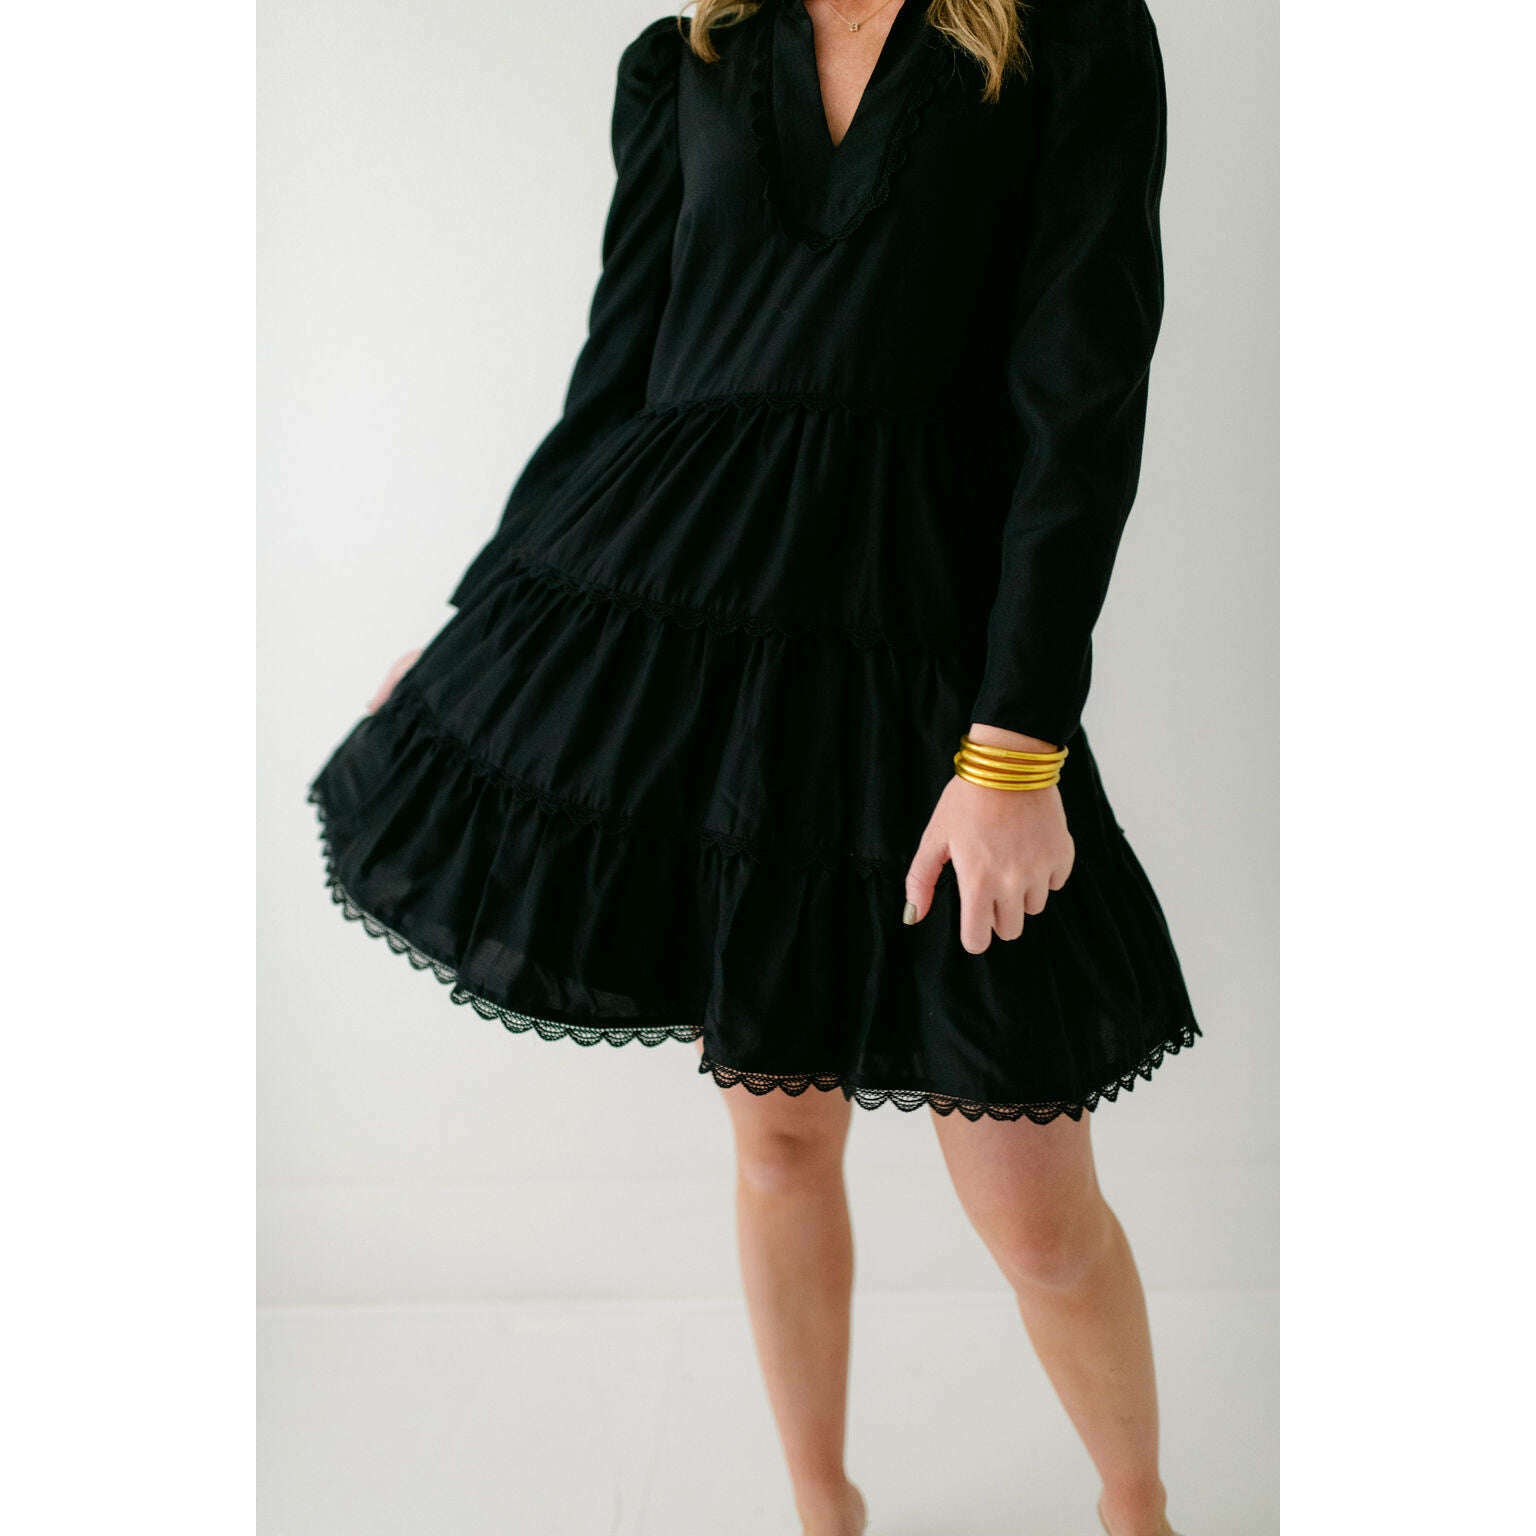 8.28 Boutique:Sail to Sable,Sail to Sable Fit and Flare Tunic Dress in Black,